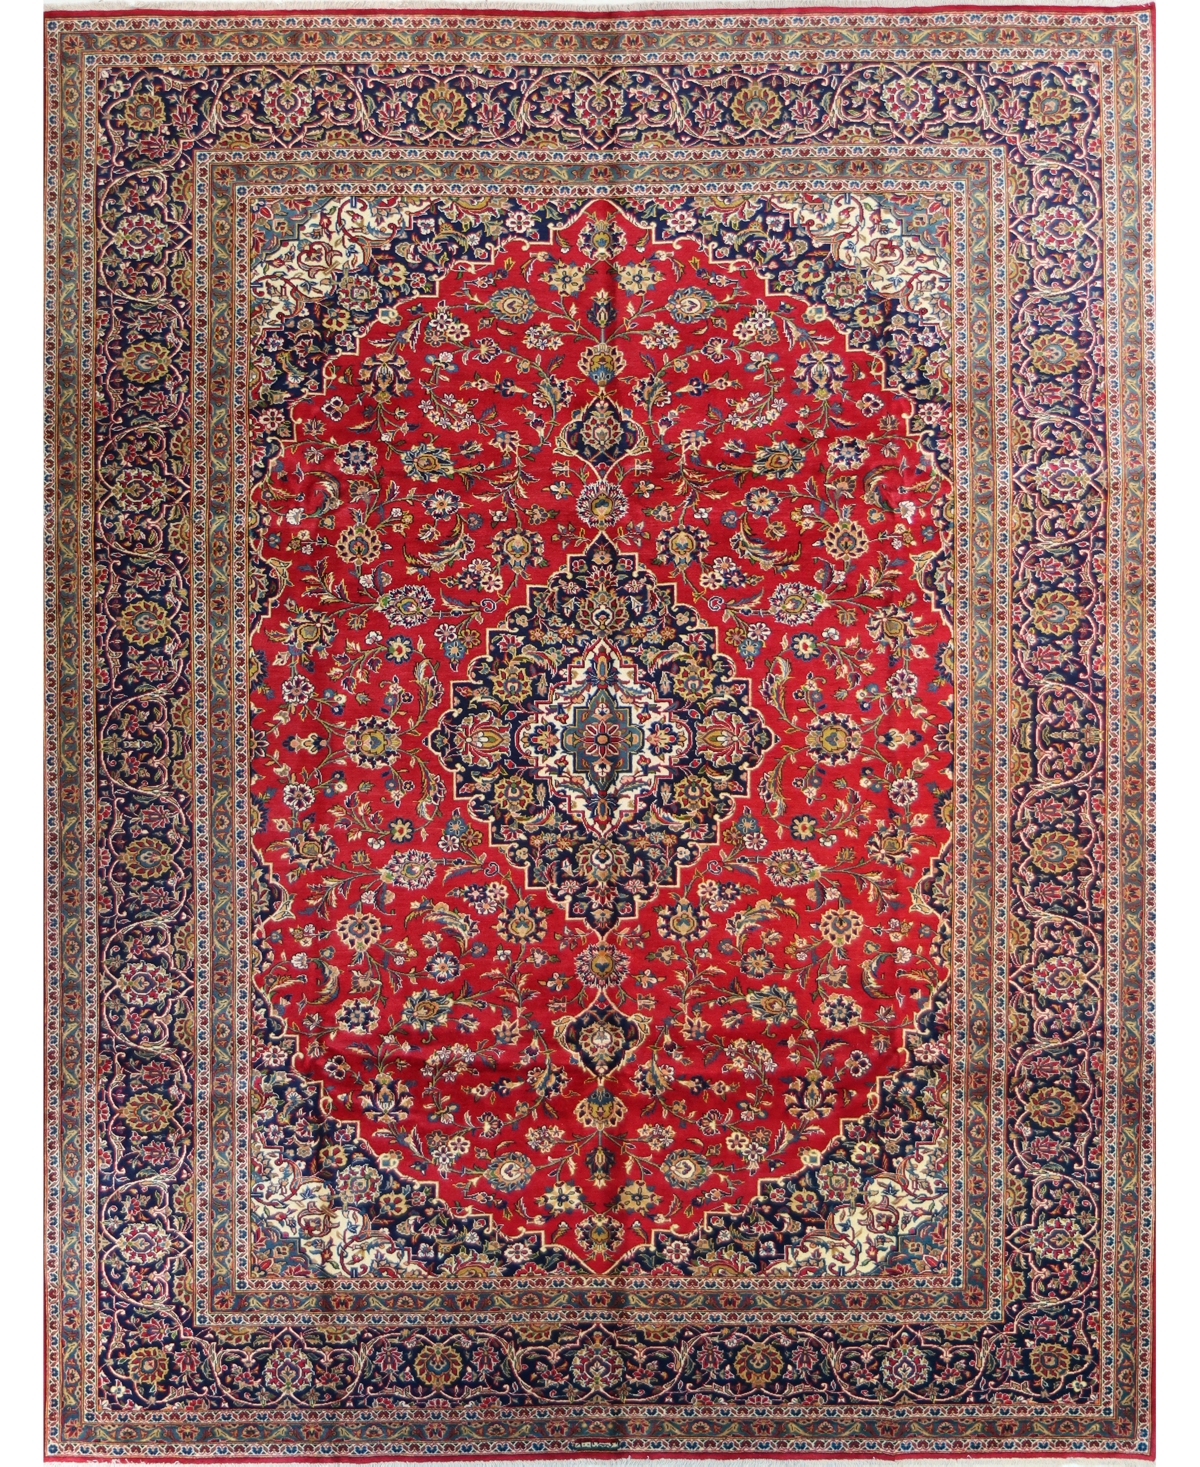 Bb Rugs One of a Kind Kashan 626204 9'8in x 12'8in Area Rug - Red